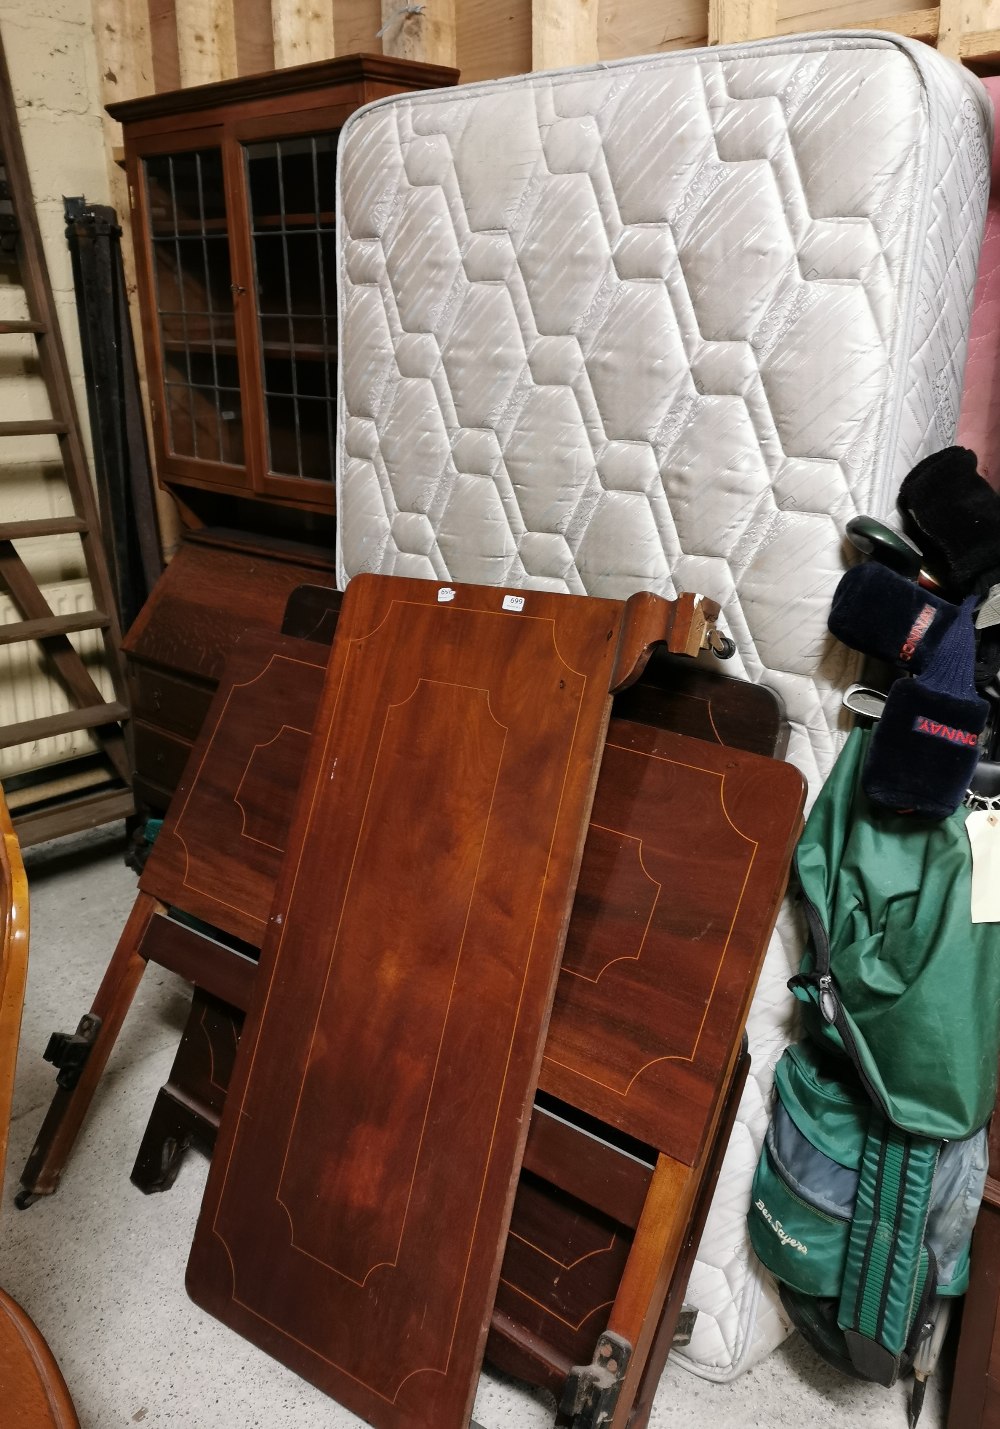 A 3’6” mahogany Bedframe with Odearest mattress and base and a similar 4ft bedframe with mattress